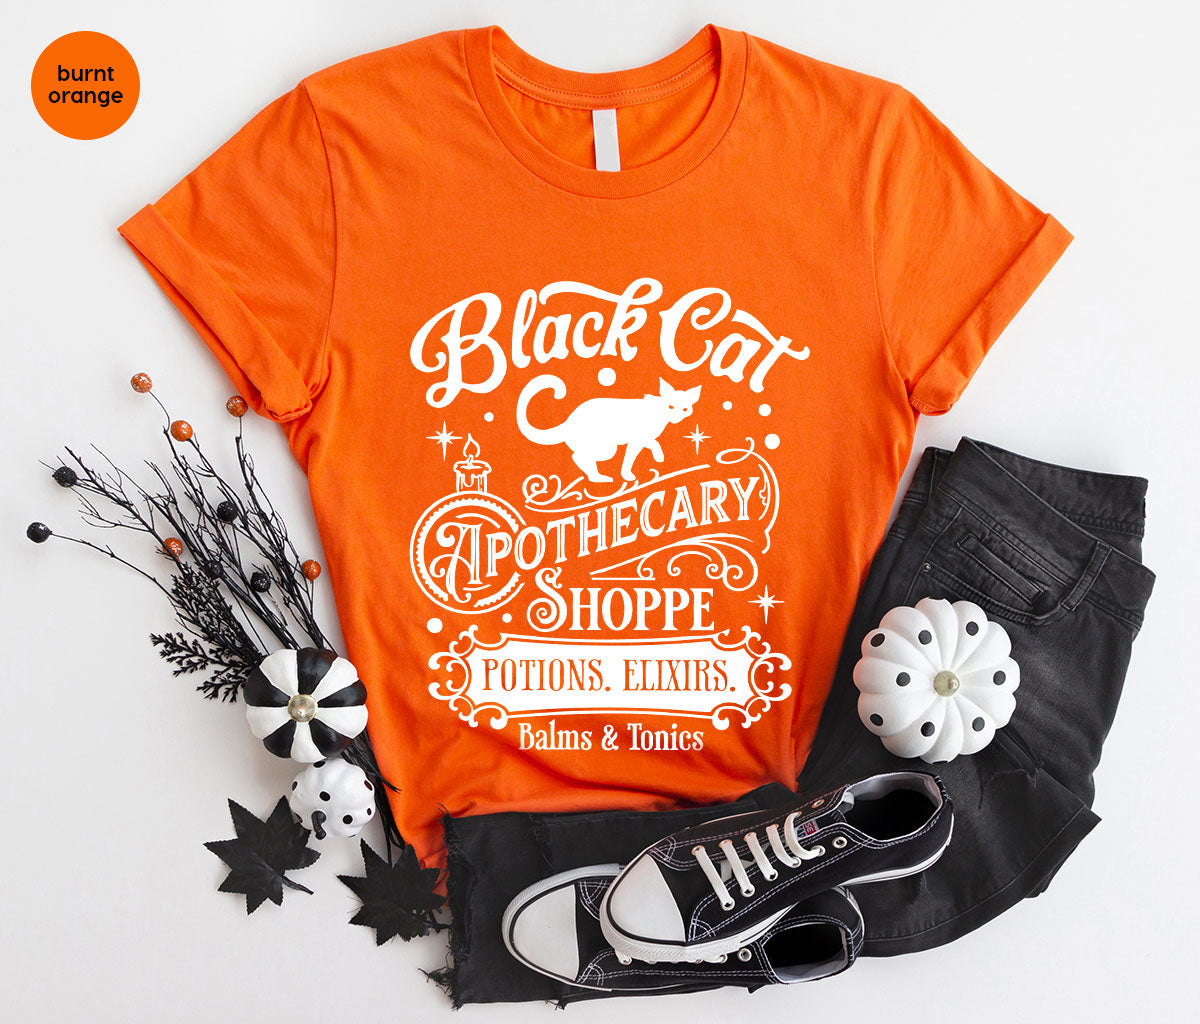 Halloween Party T-Shirt, Spooky Sweatshirt, Halloween Gifts, Cat Clothing, Genderneutral Adult Shirt, Apothecary Graphic Tees, Gift for Kids